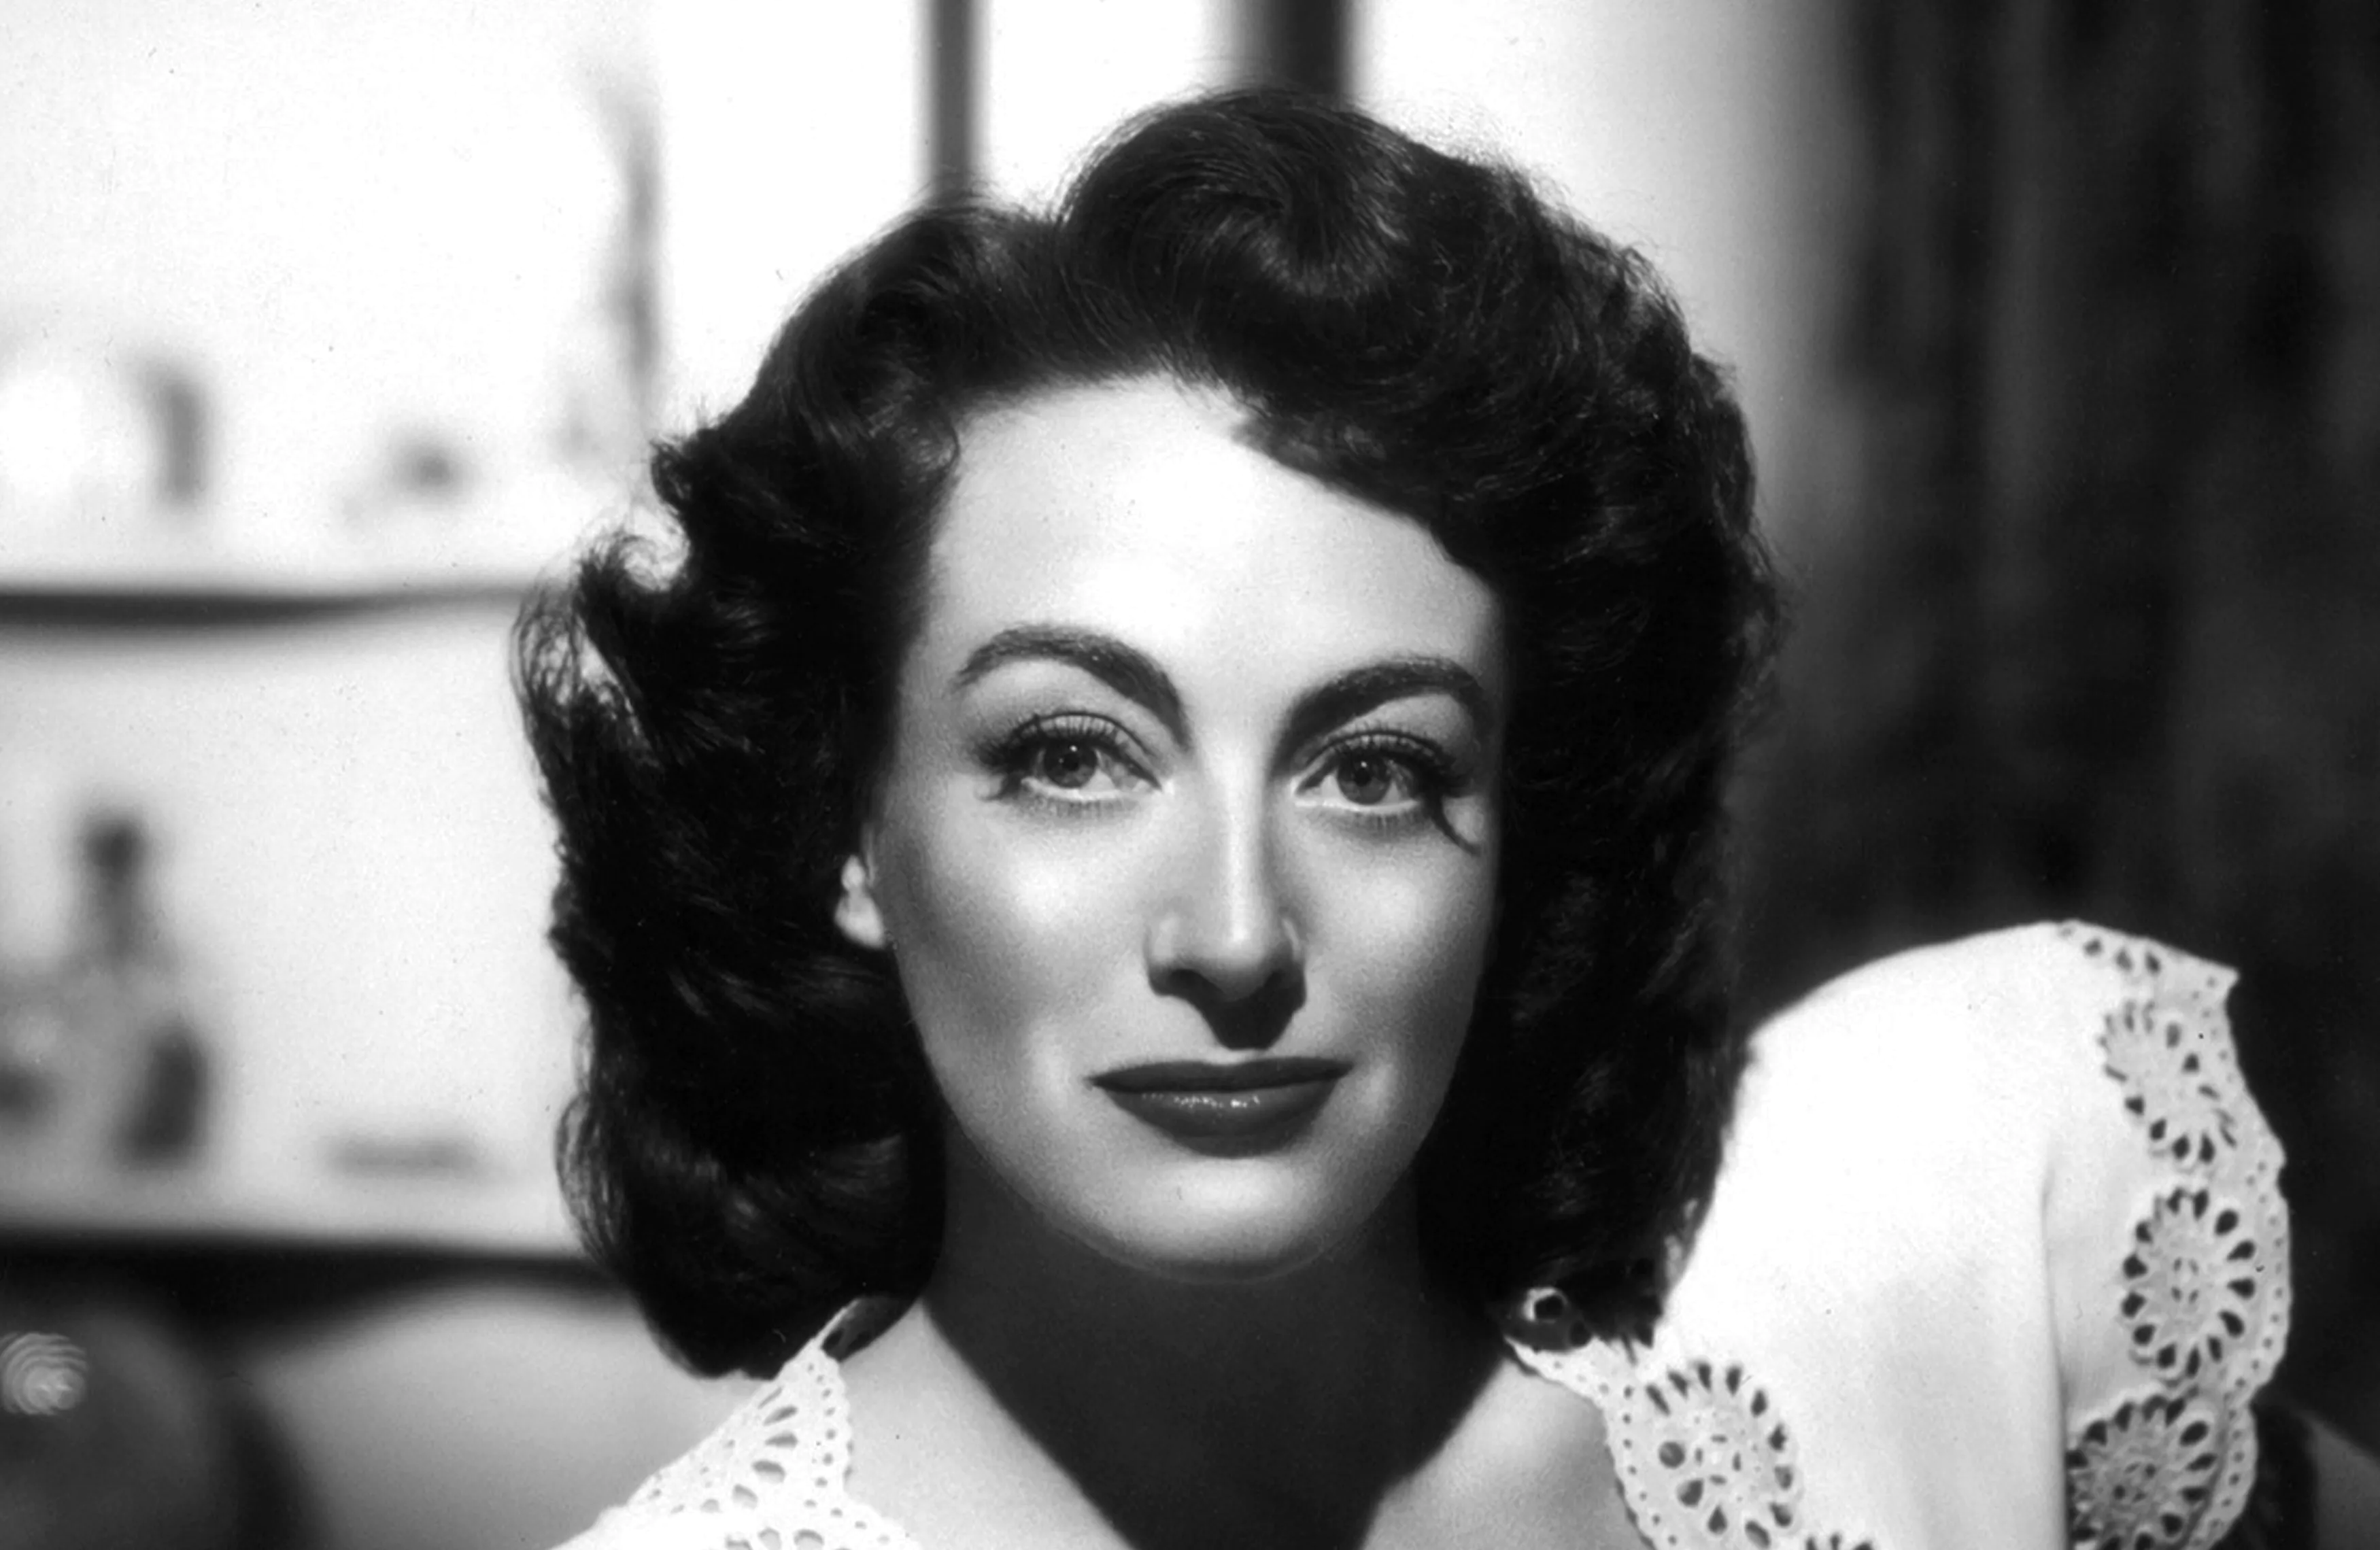 Black and white image of Joan. She is smiling calmly facing the camera.